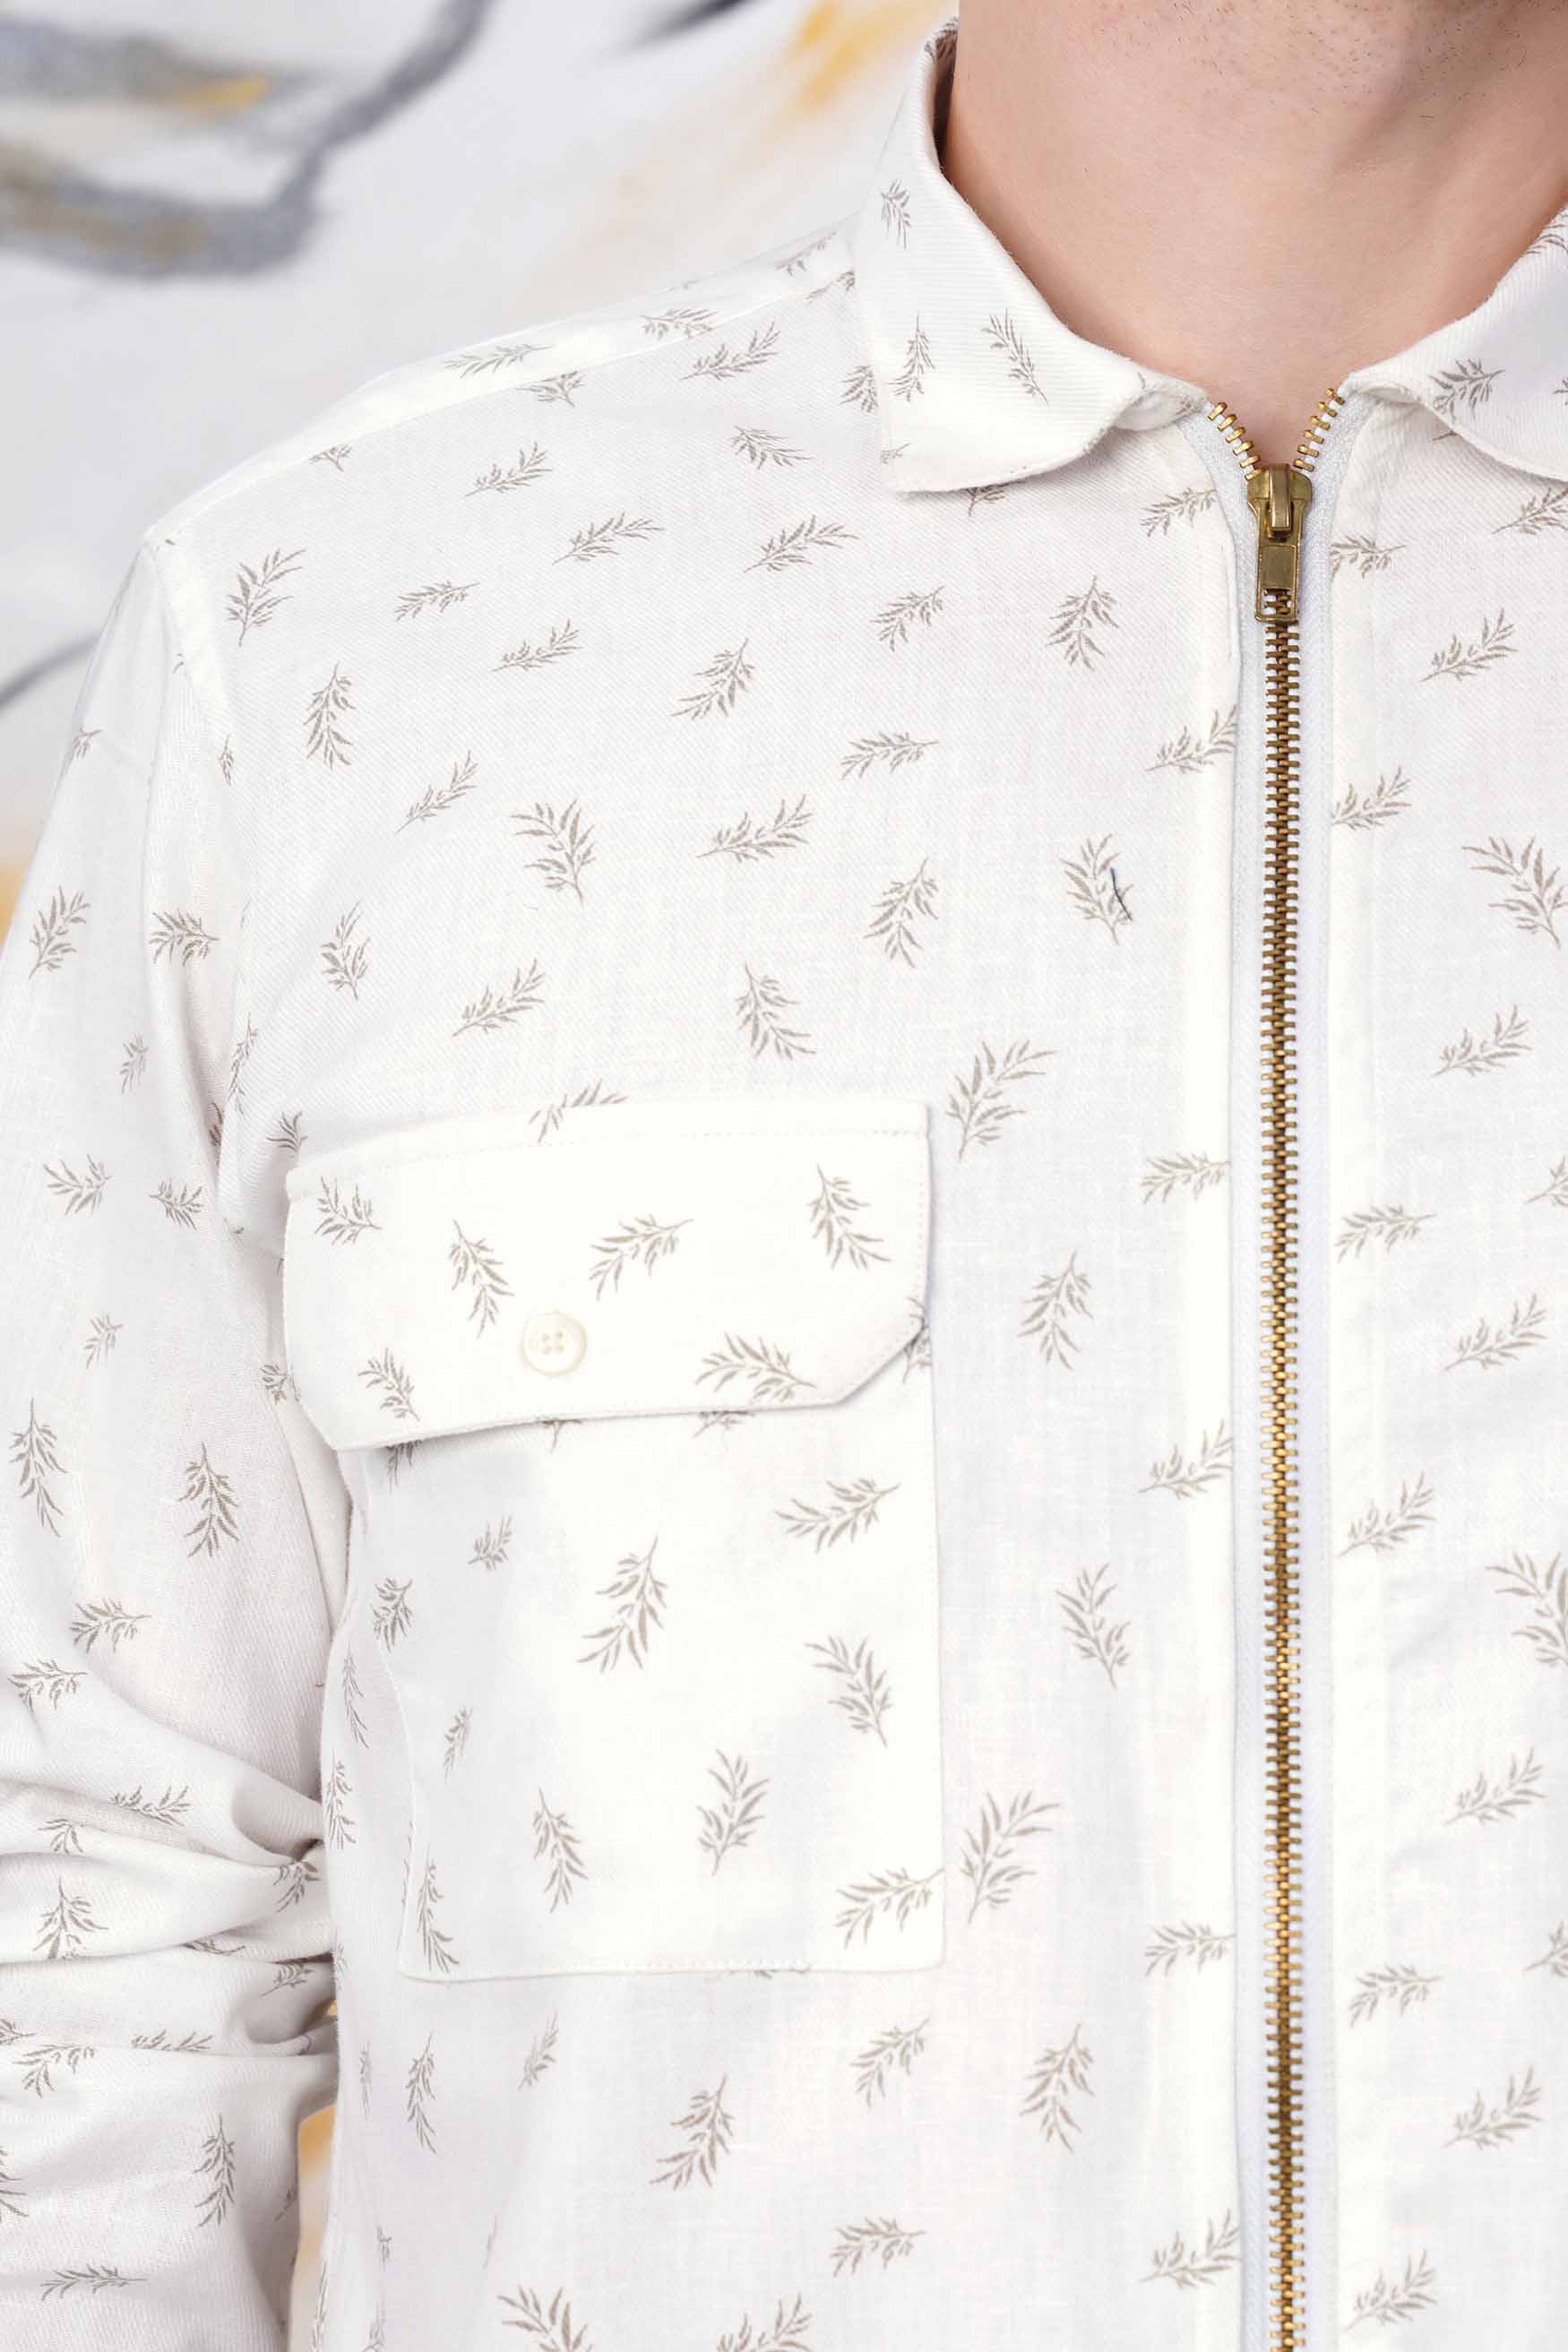 Bright White Leaves Printed Royal Oxford Designer Shirt with Zipper Closure